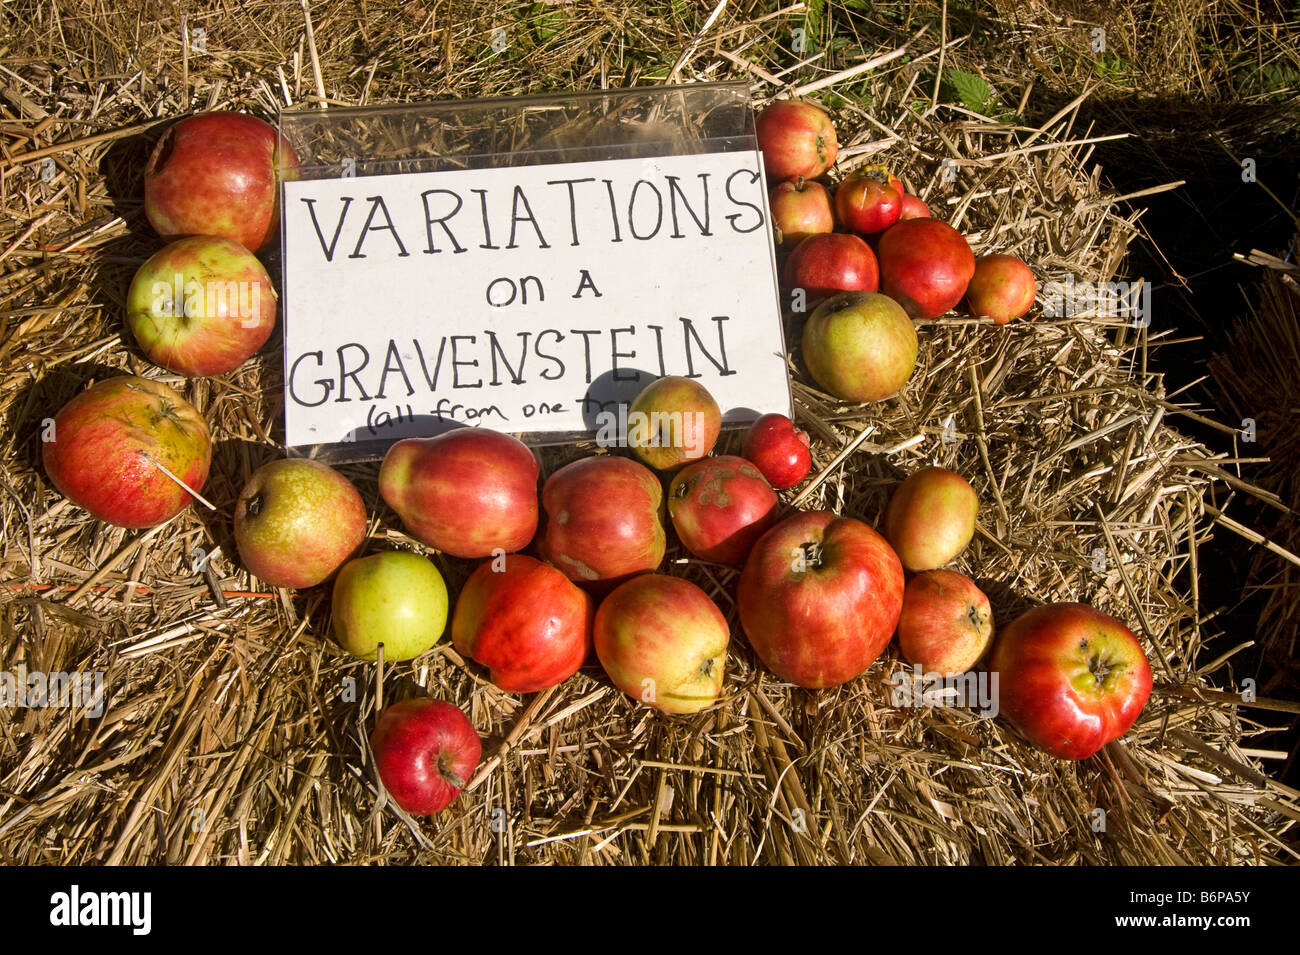 Gravenstein apples on display during annual fall apple festival on Salt Spring Island, British Columbia, Canada Stock Photo